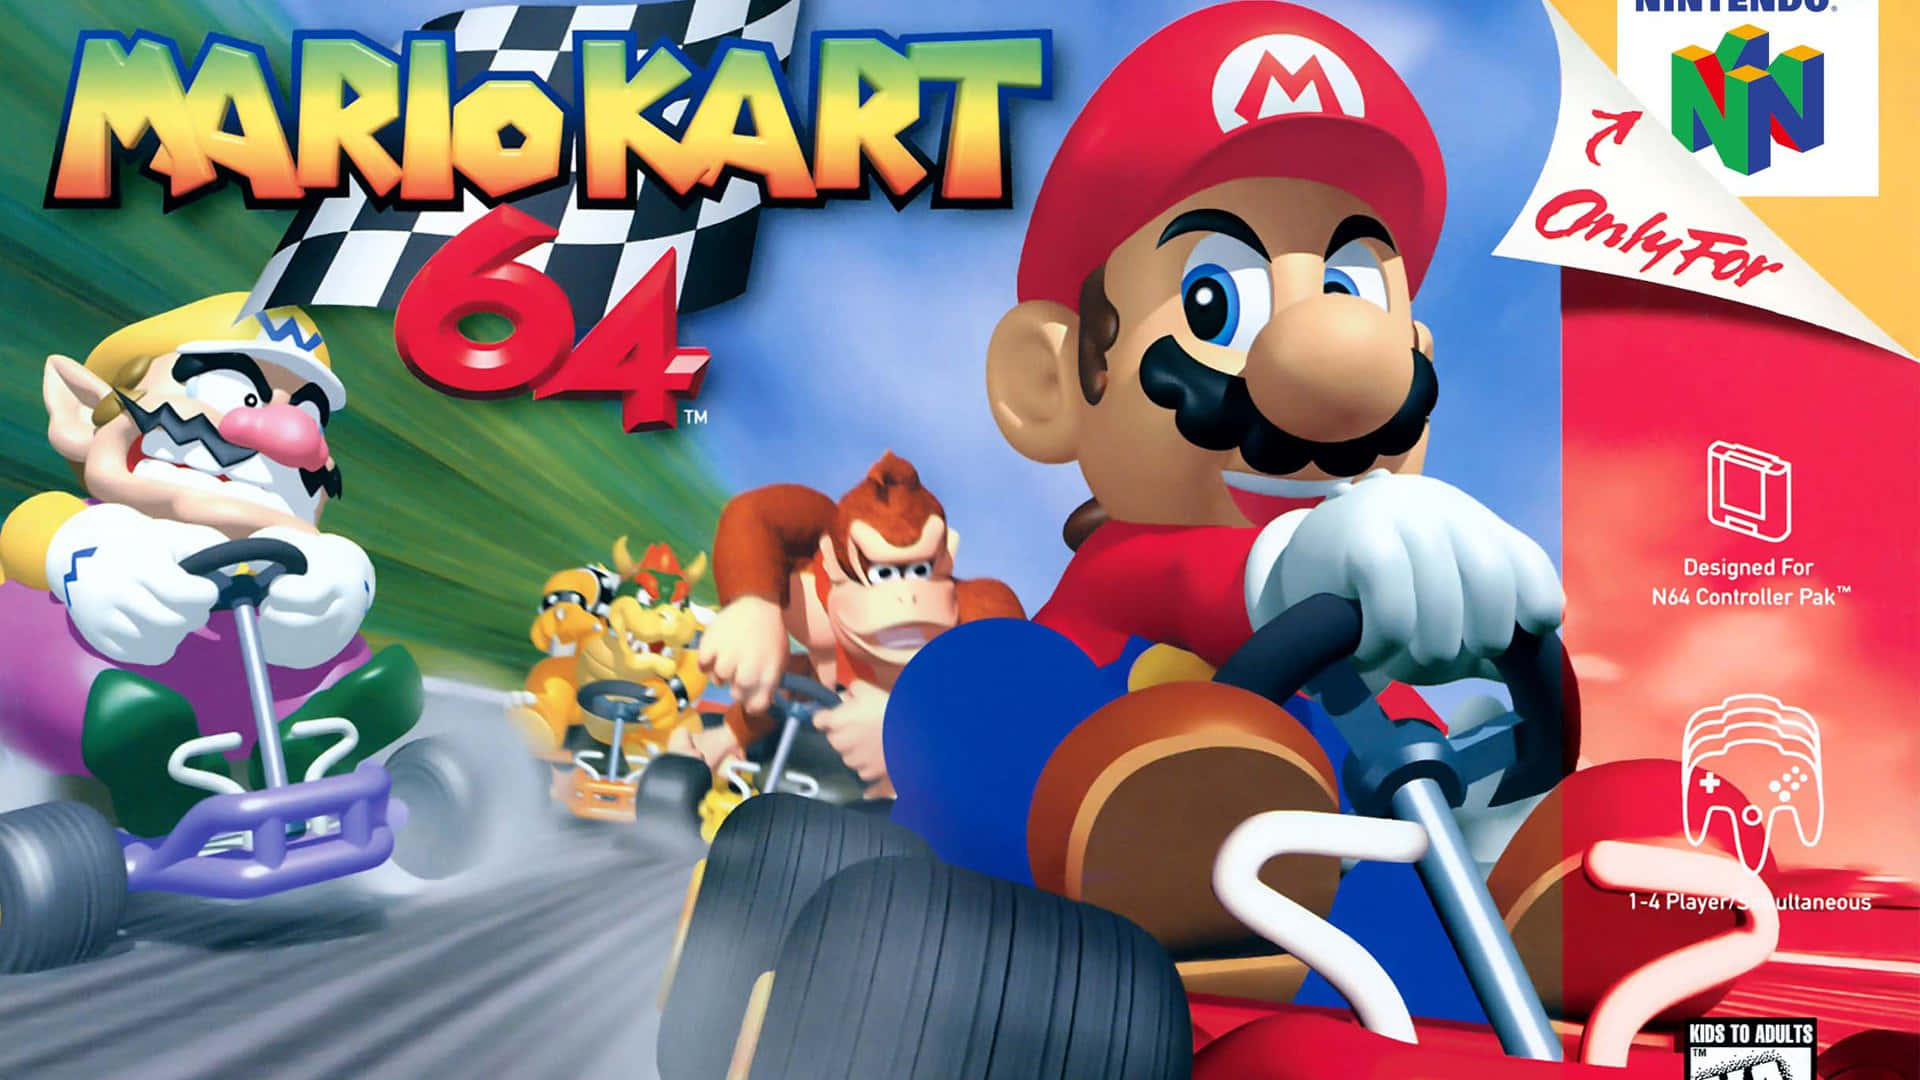 Enjoy the thrill of the race with Mario Kart.